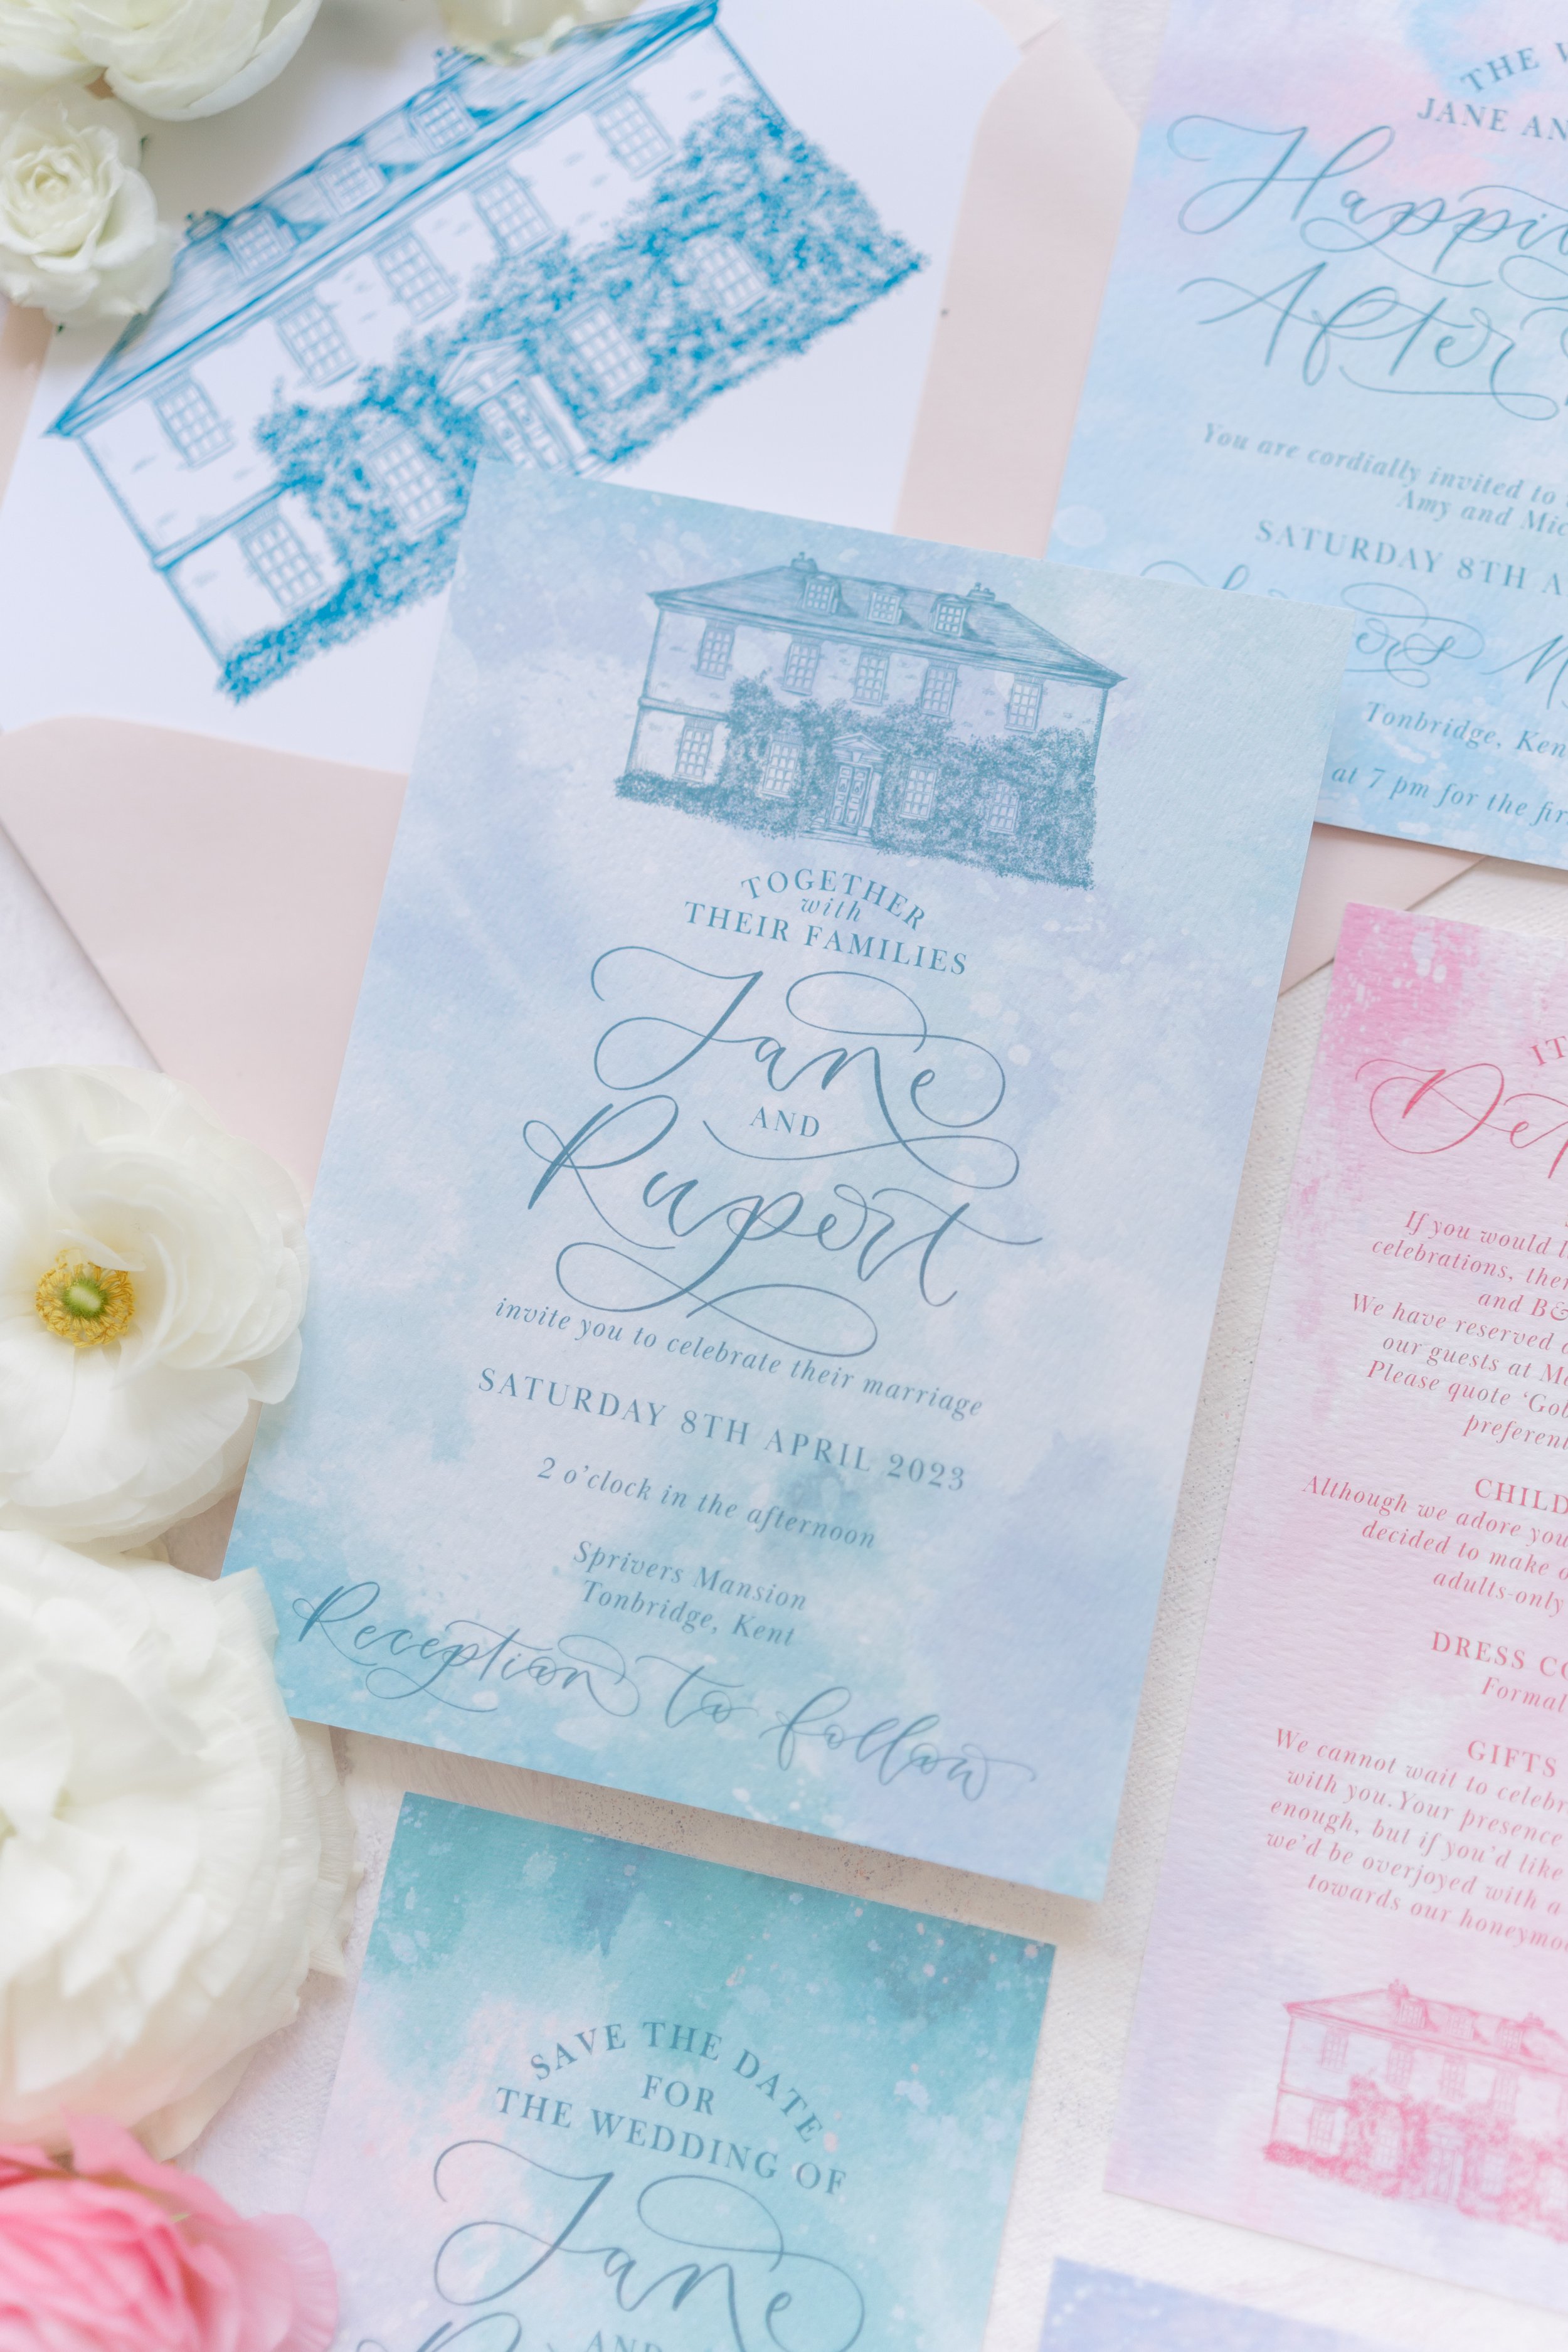 The Amyverse - pastel invitation set with invite, details card, rsvp card with pastel watercolour washes and venue illustration of sprivers mansion - Teal invitation.jpg